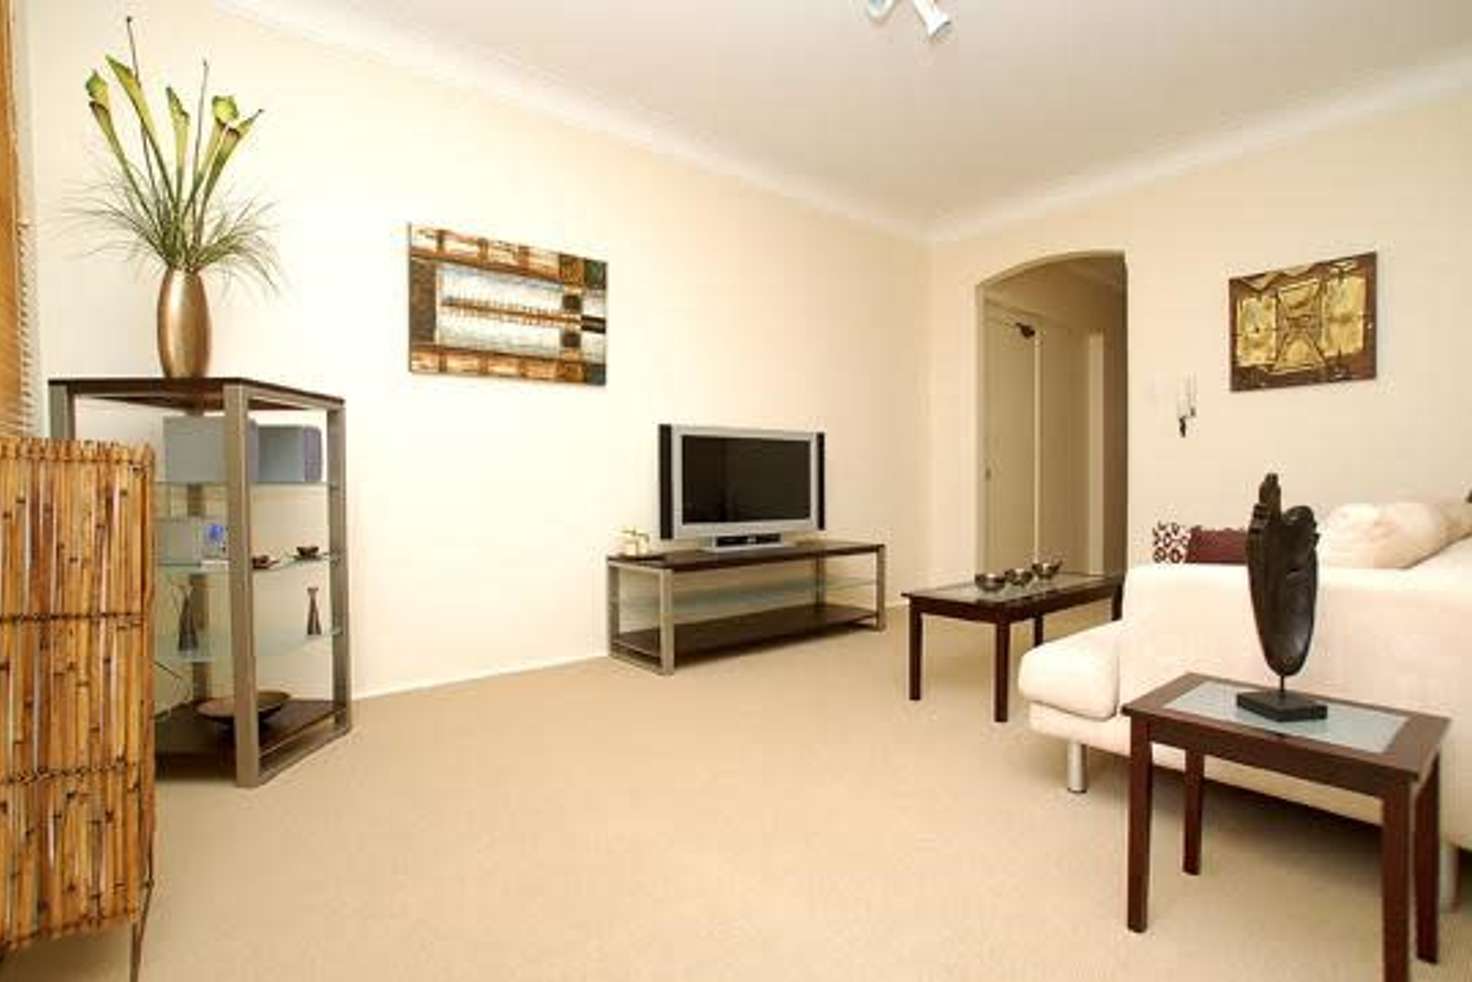 Main view of Homely apartment listing, 2/1 Macarthur Avenue, Crows Nest NSW 2065